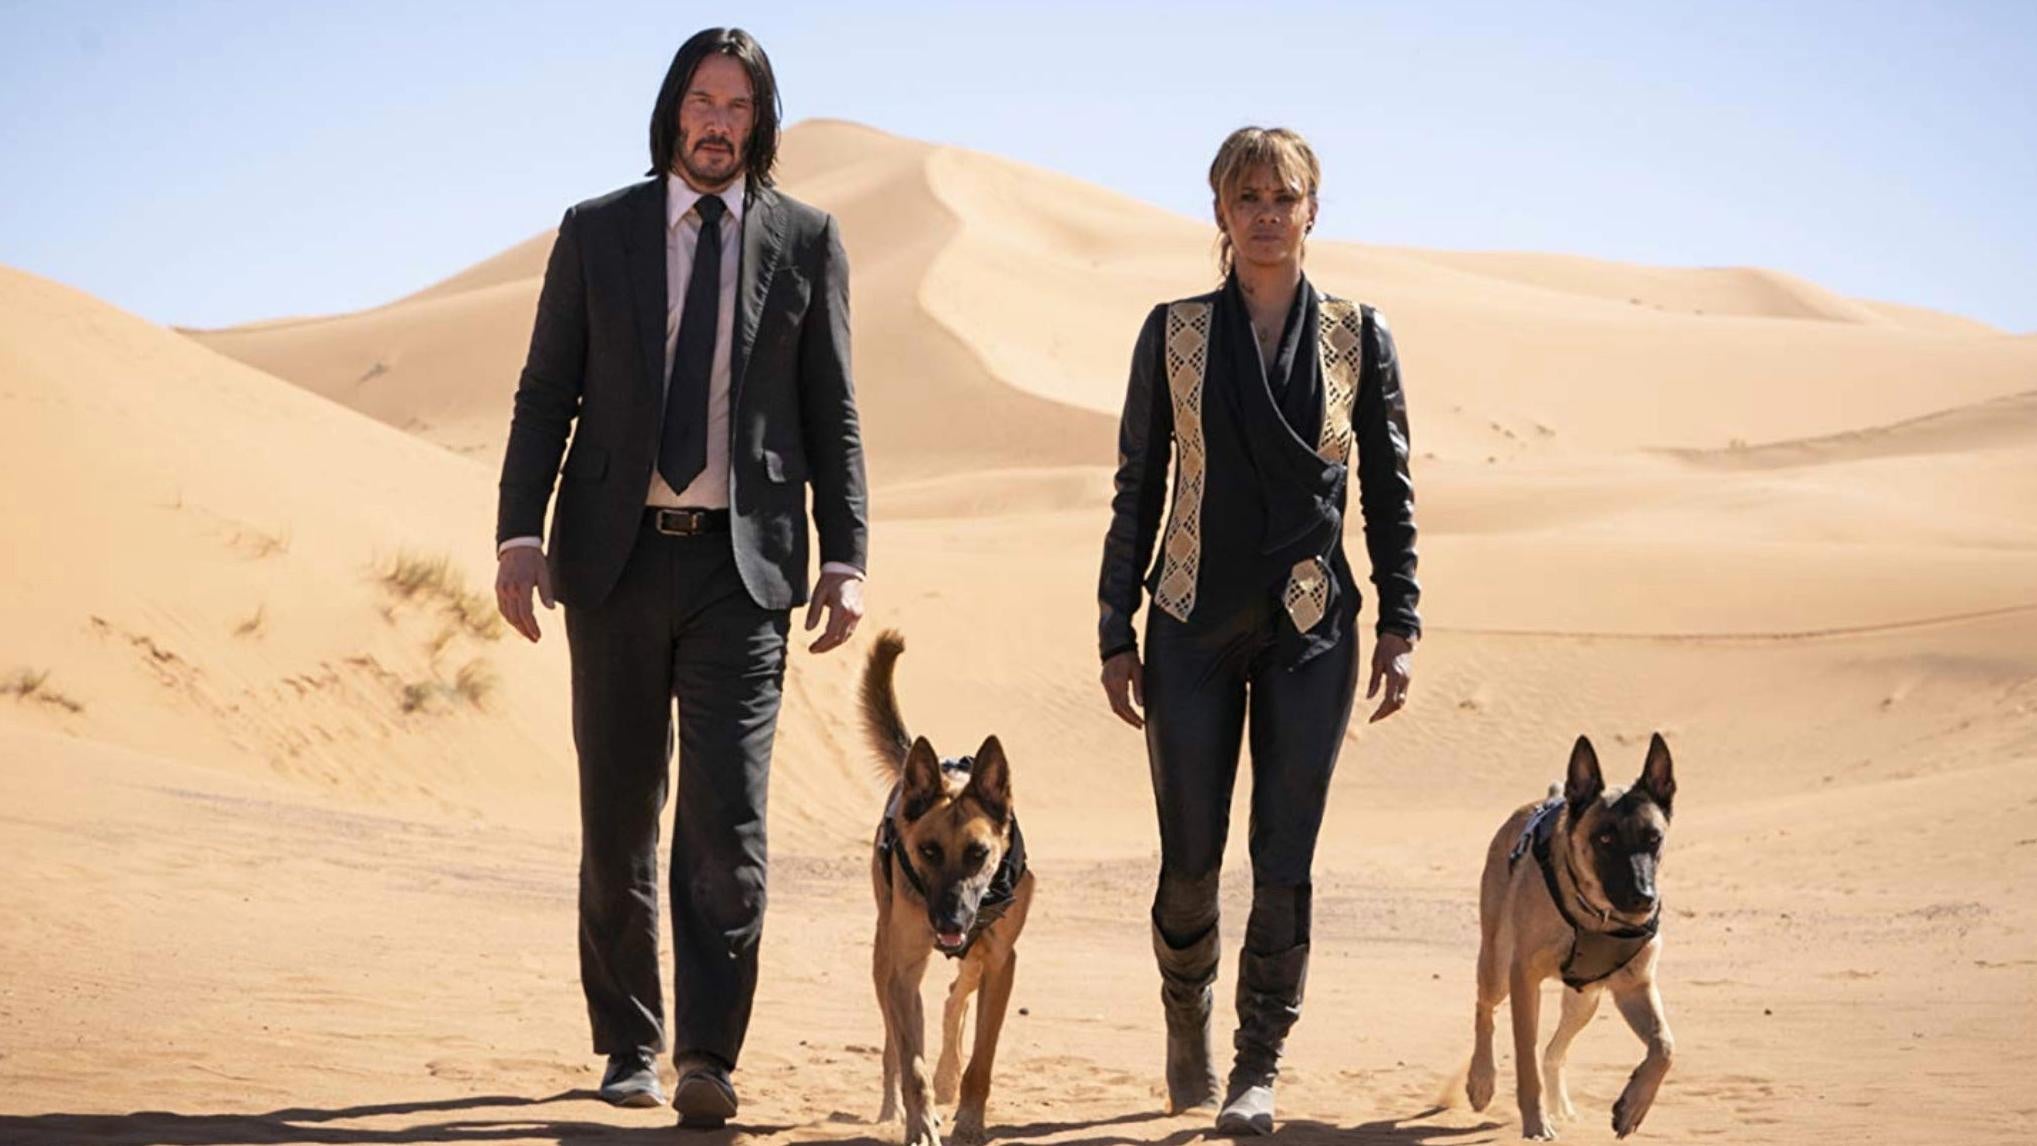 Keanu Reeves and Halle Berry in John Wick 3. (Image: Lionsgate)